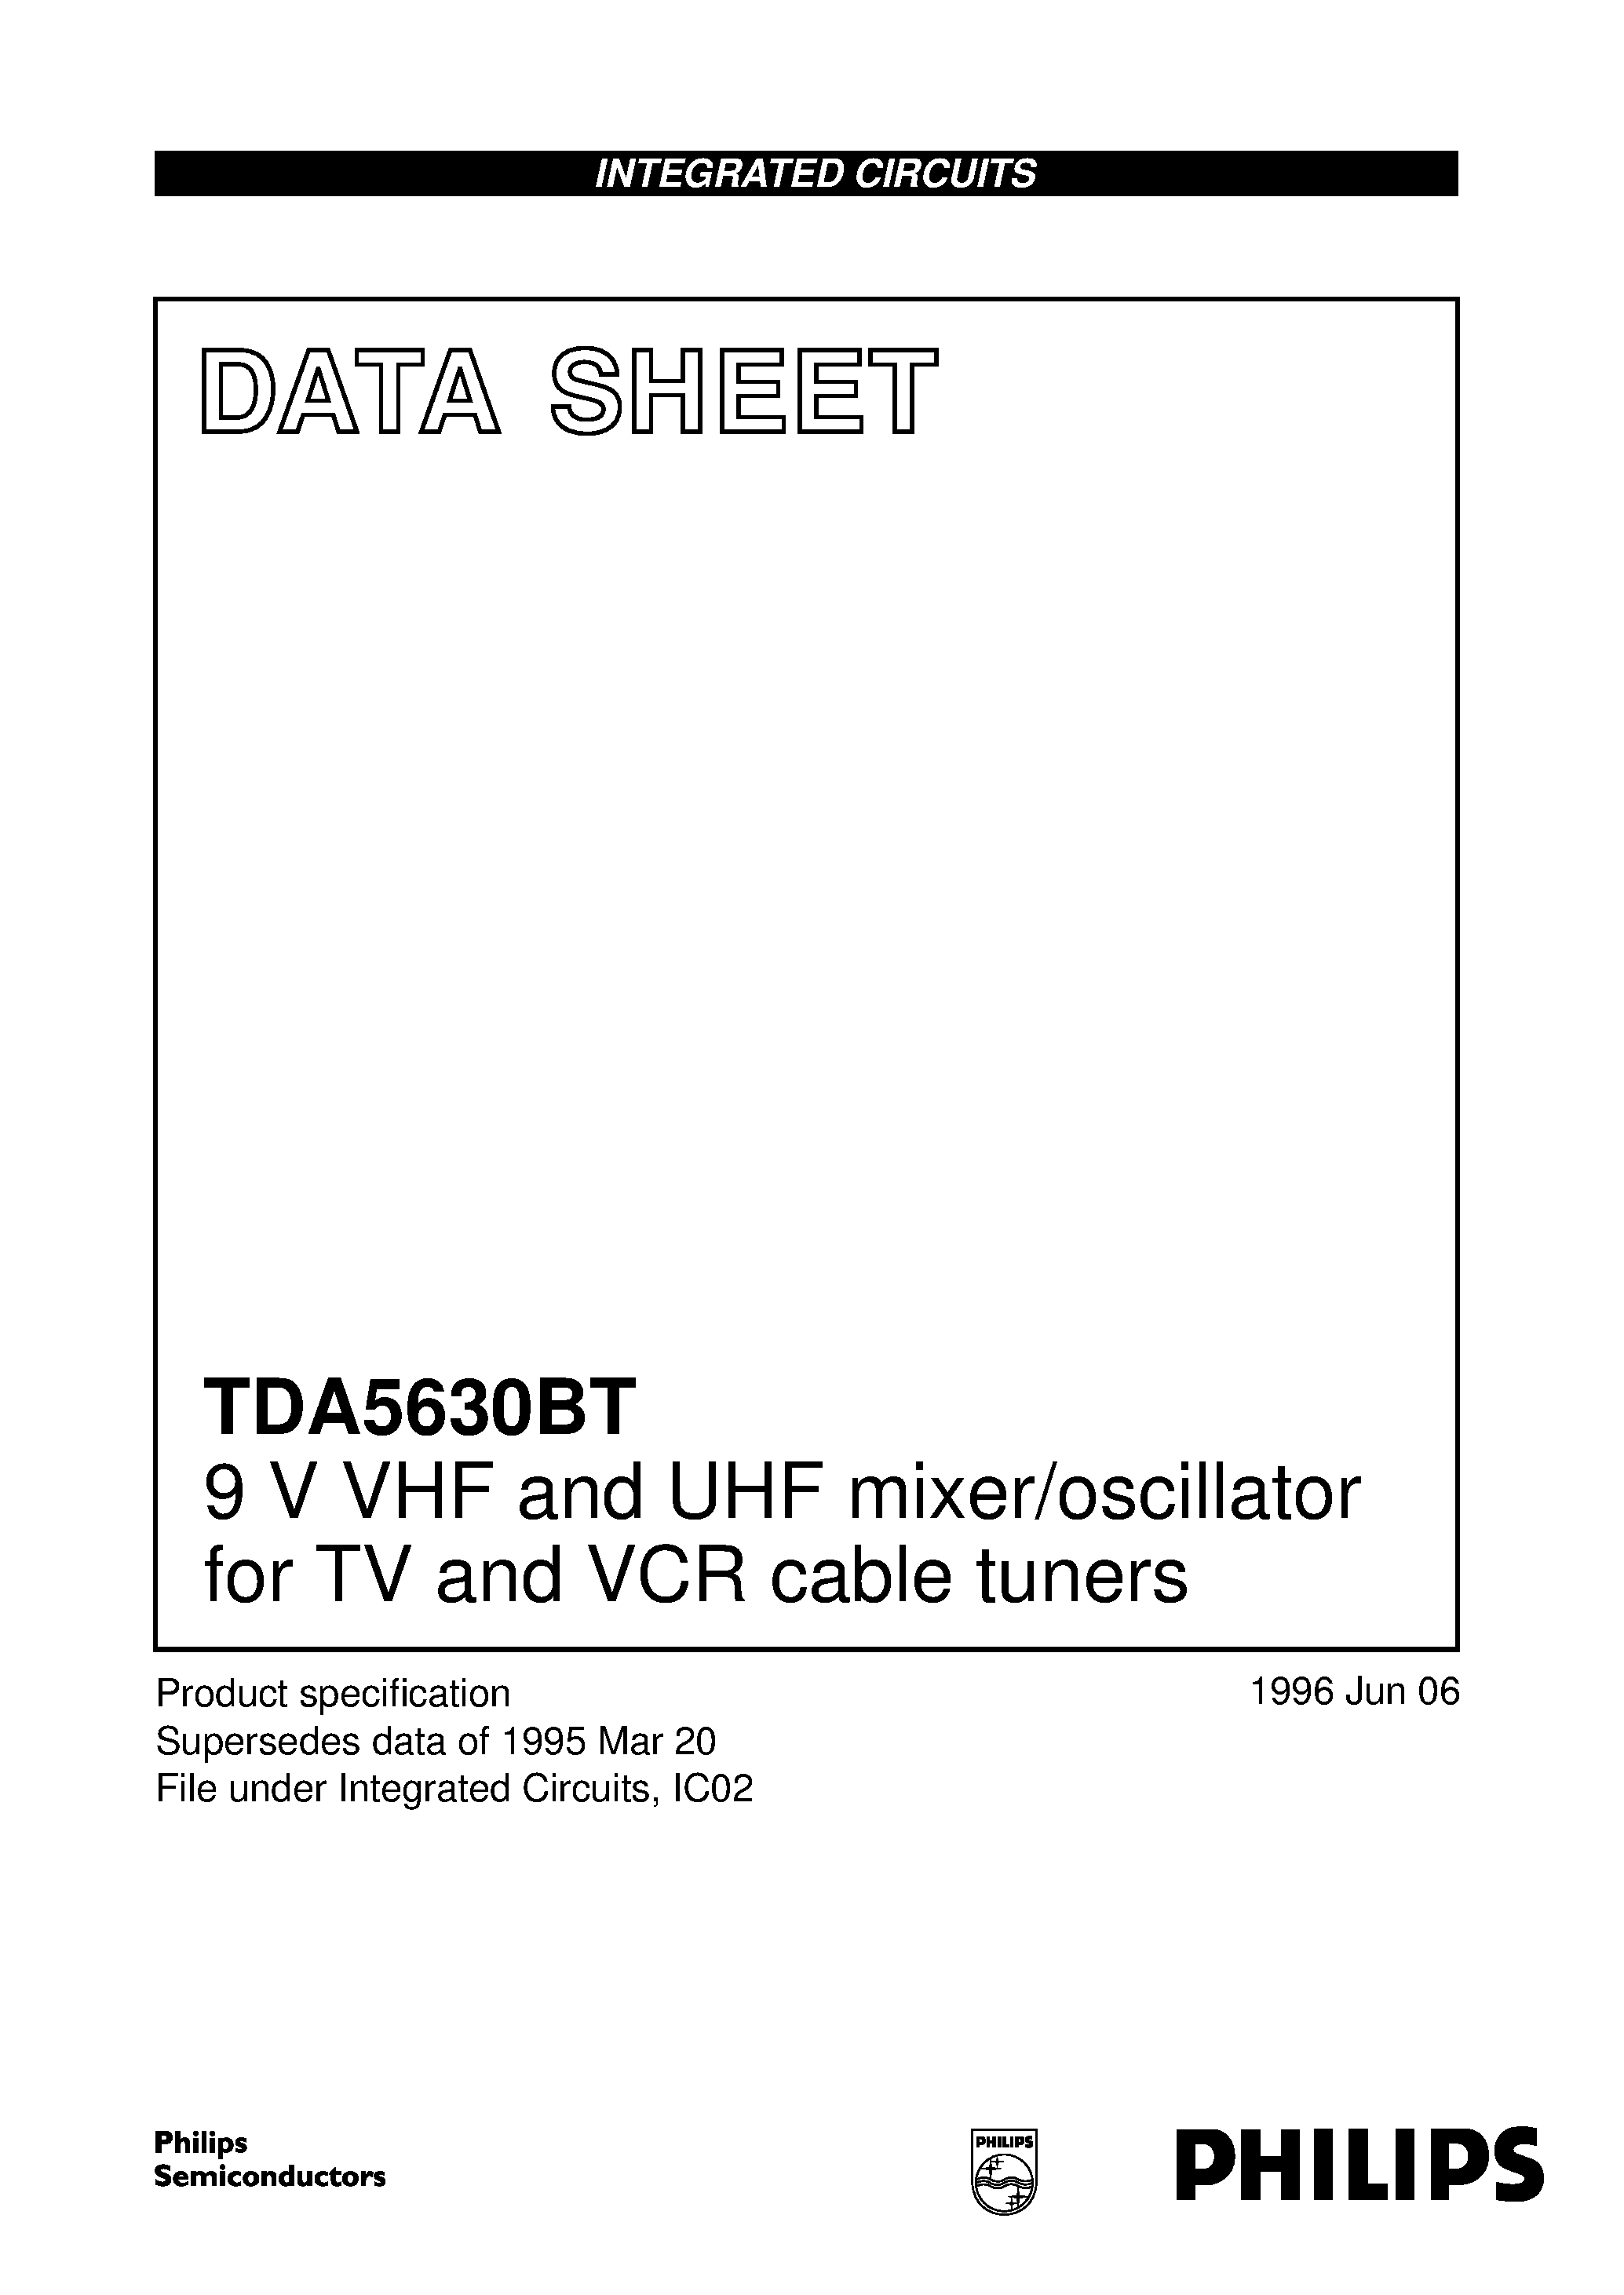 Datasheet TDA5630BT - 9 V VHF and UHF mixer/oscillator for TV and VCR cable tuners page 1